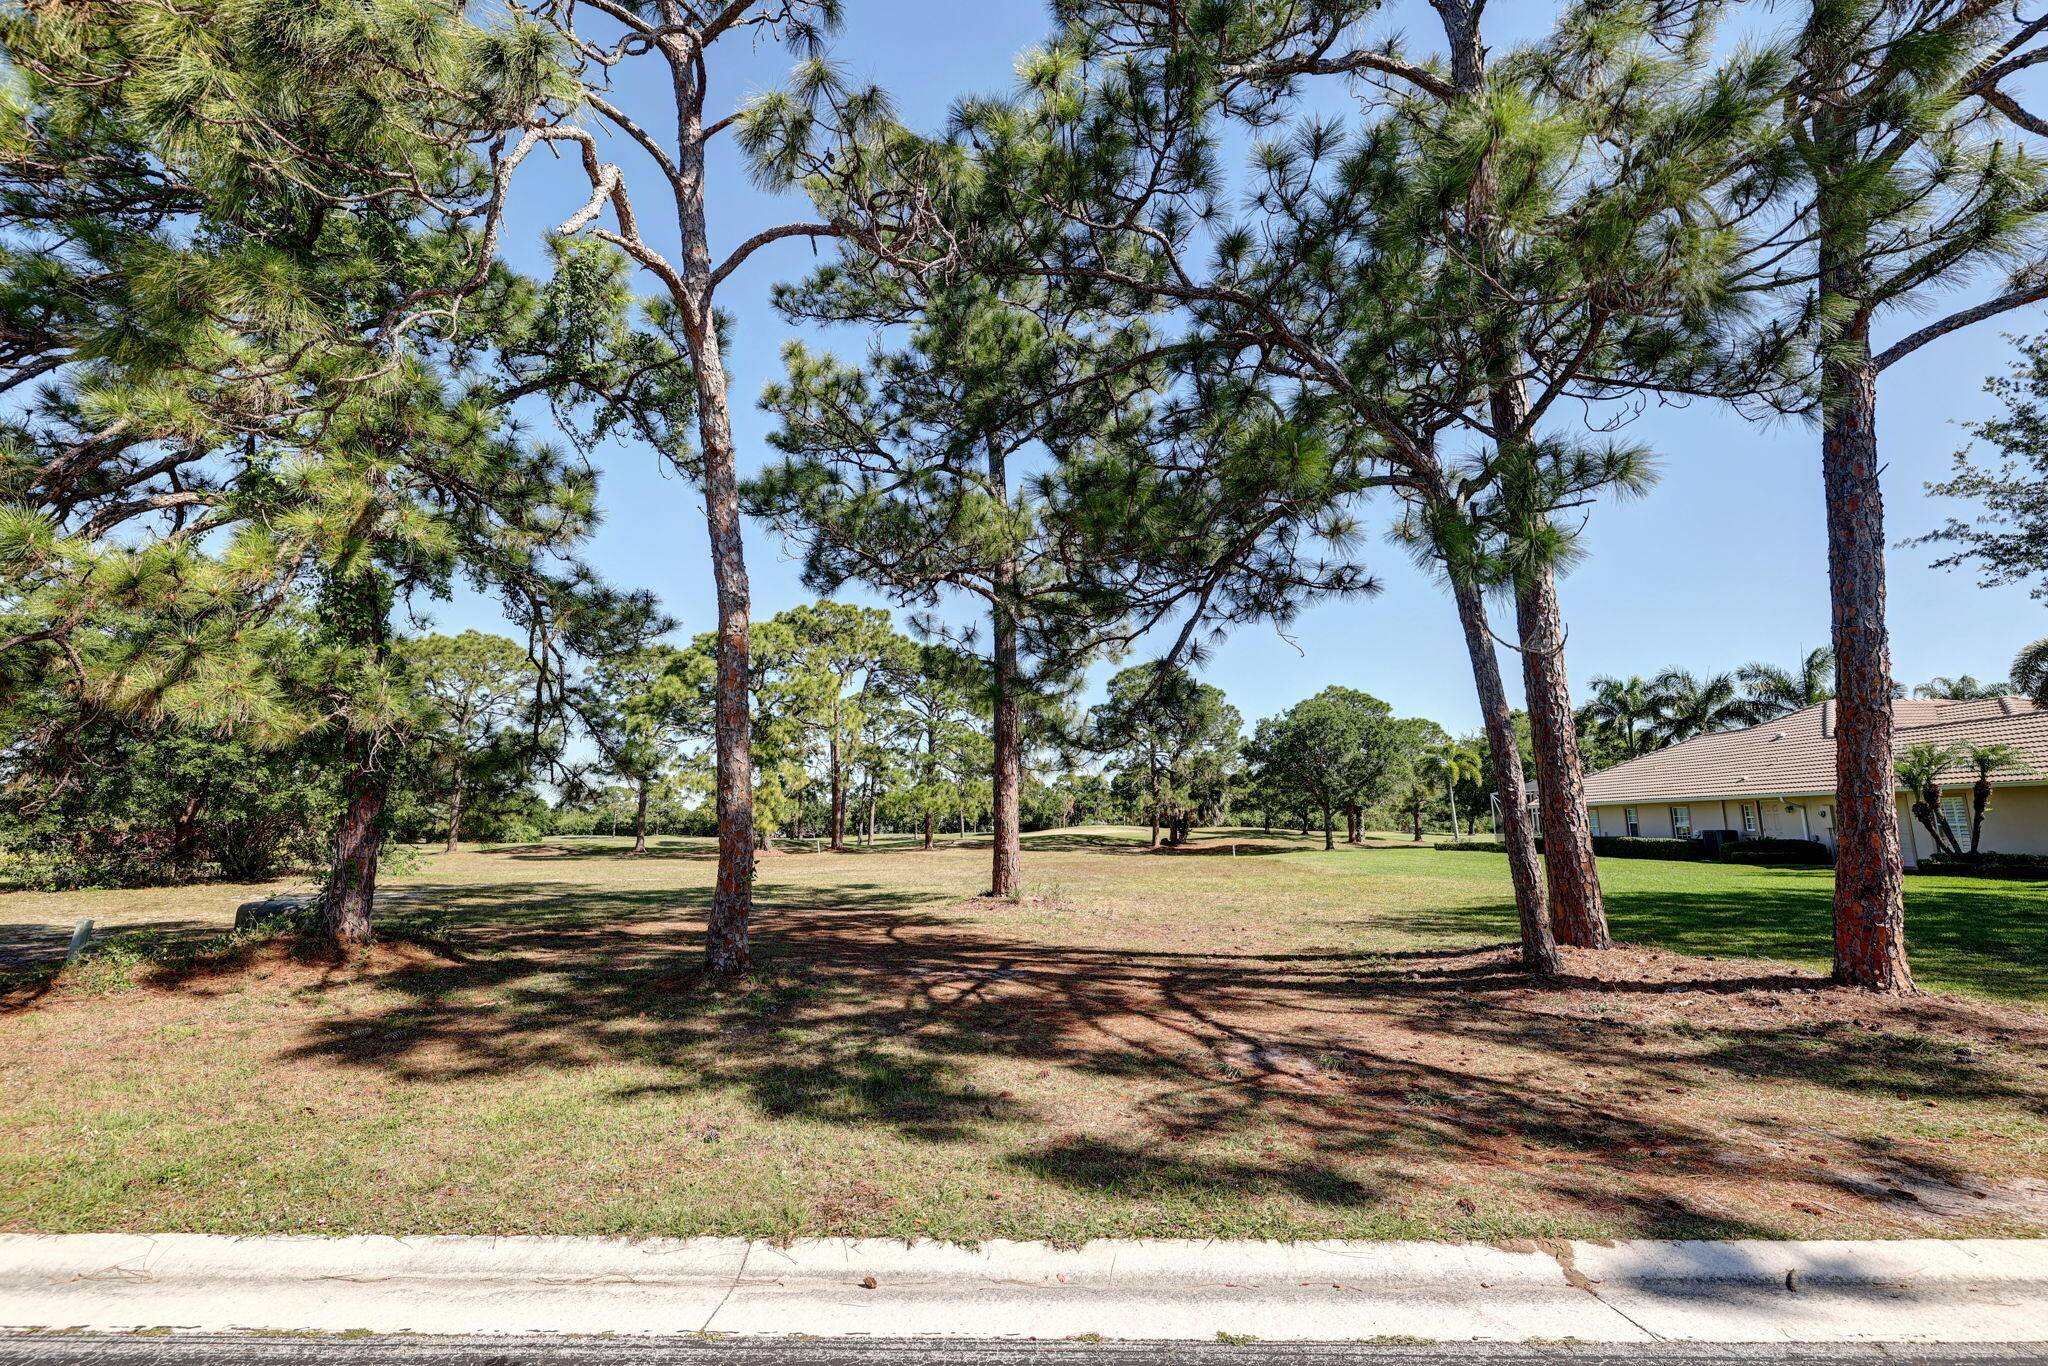 Welcome to 9620 Knollwood in the exclusive Meadowood community of Fort Pierce, Florida a golfer's paradise where the green stretches as far as the eye can see.